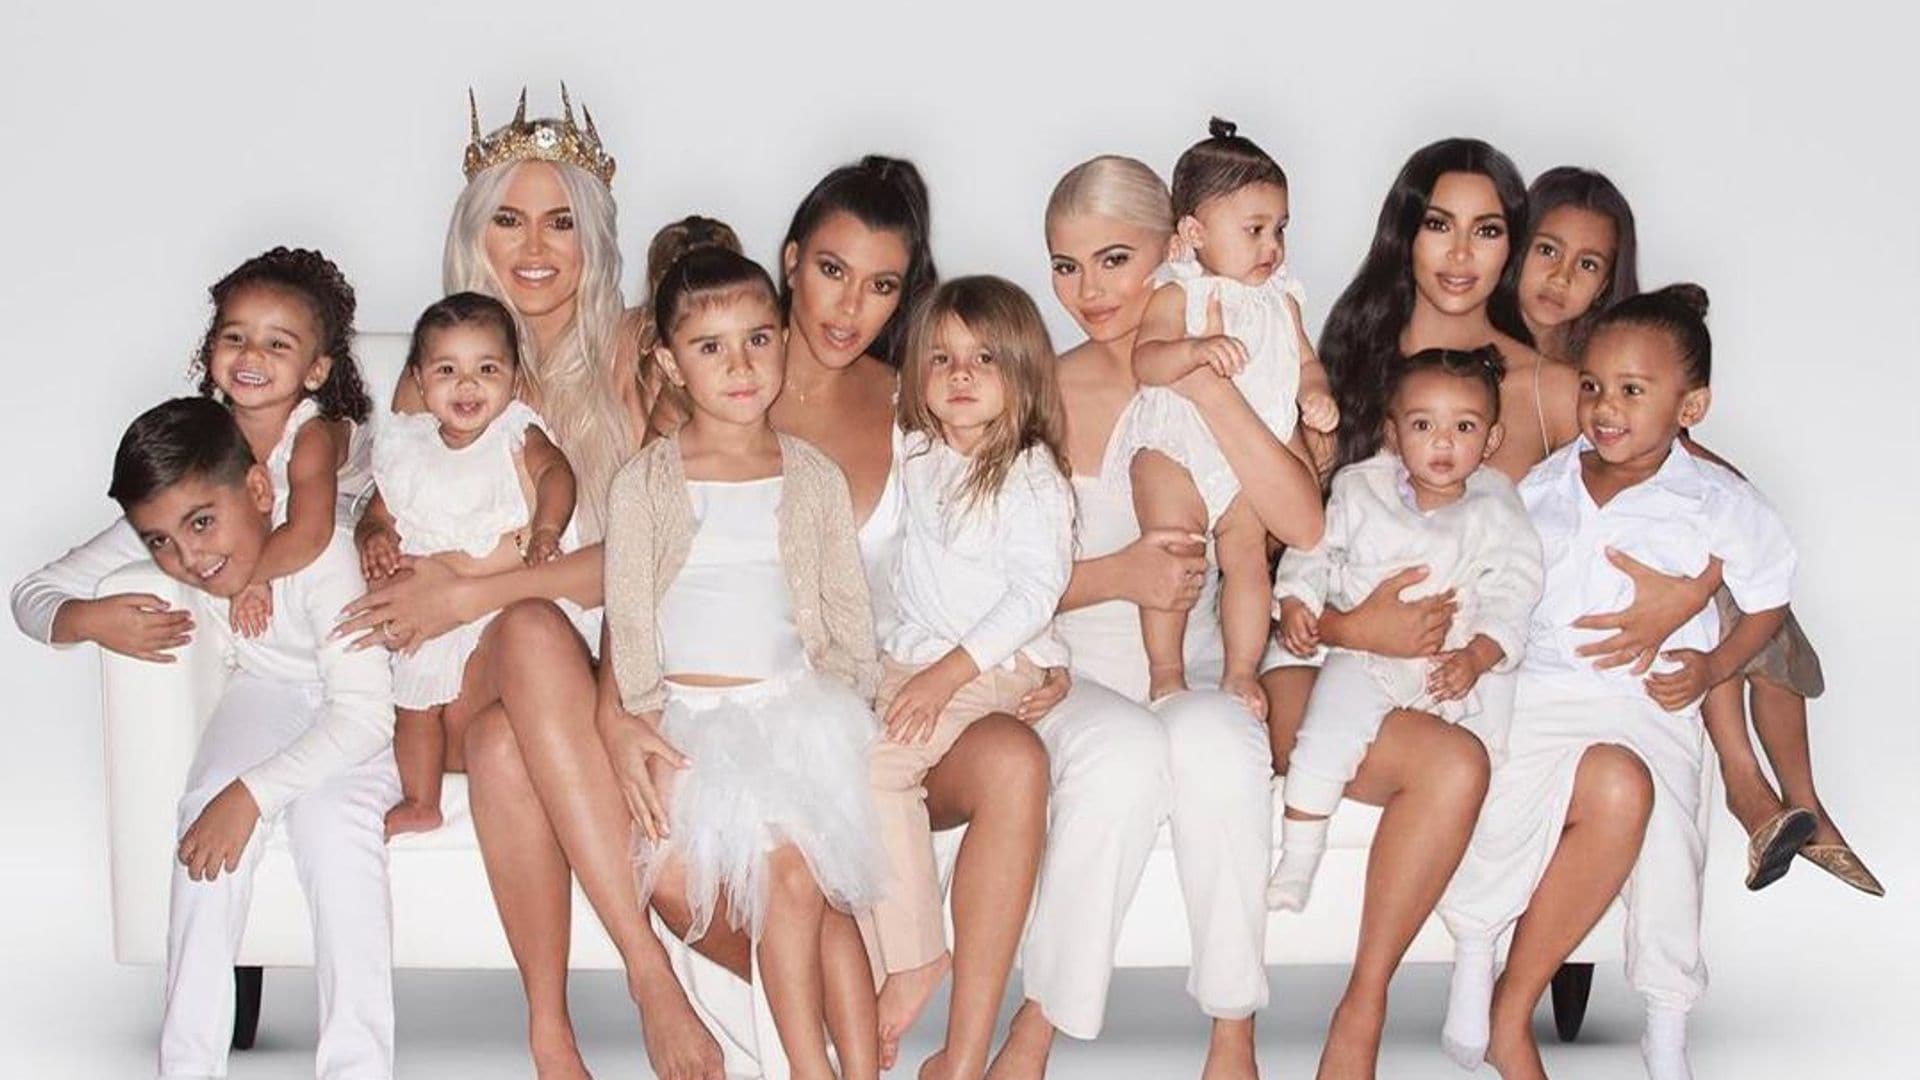 Kylie Jenner posed with Psalm West and called herself the “cool aunt”